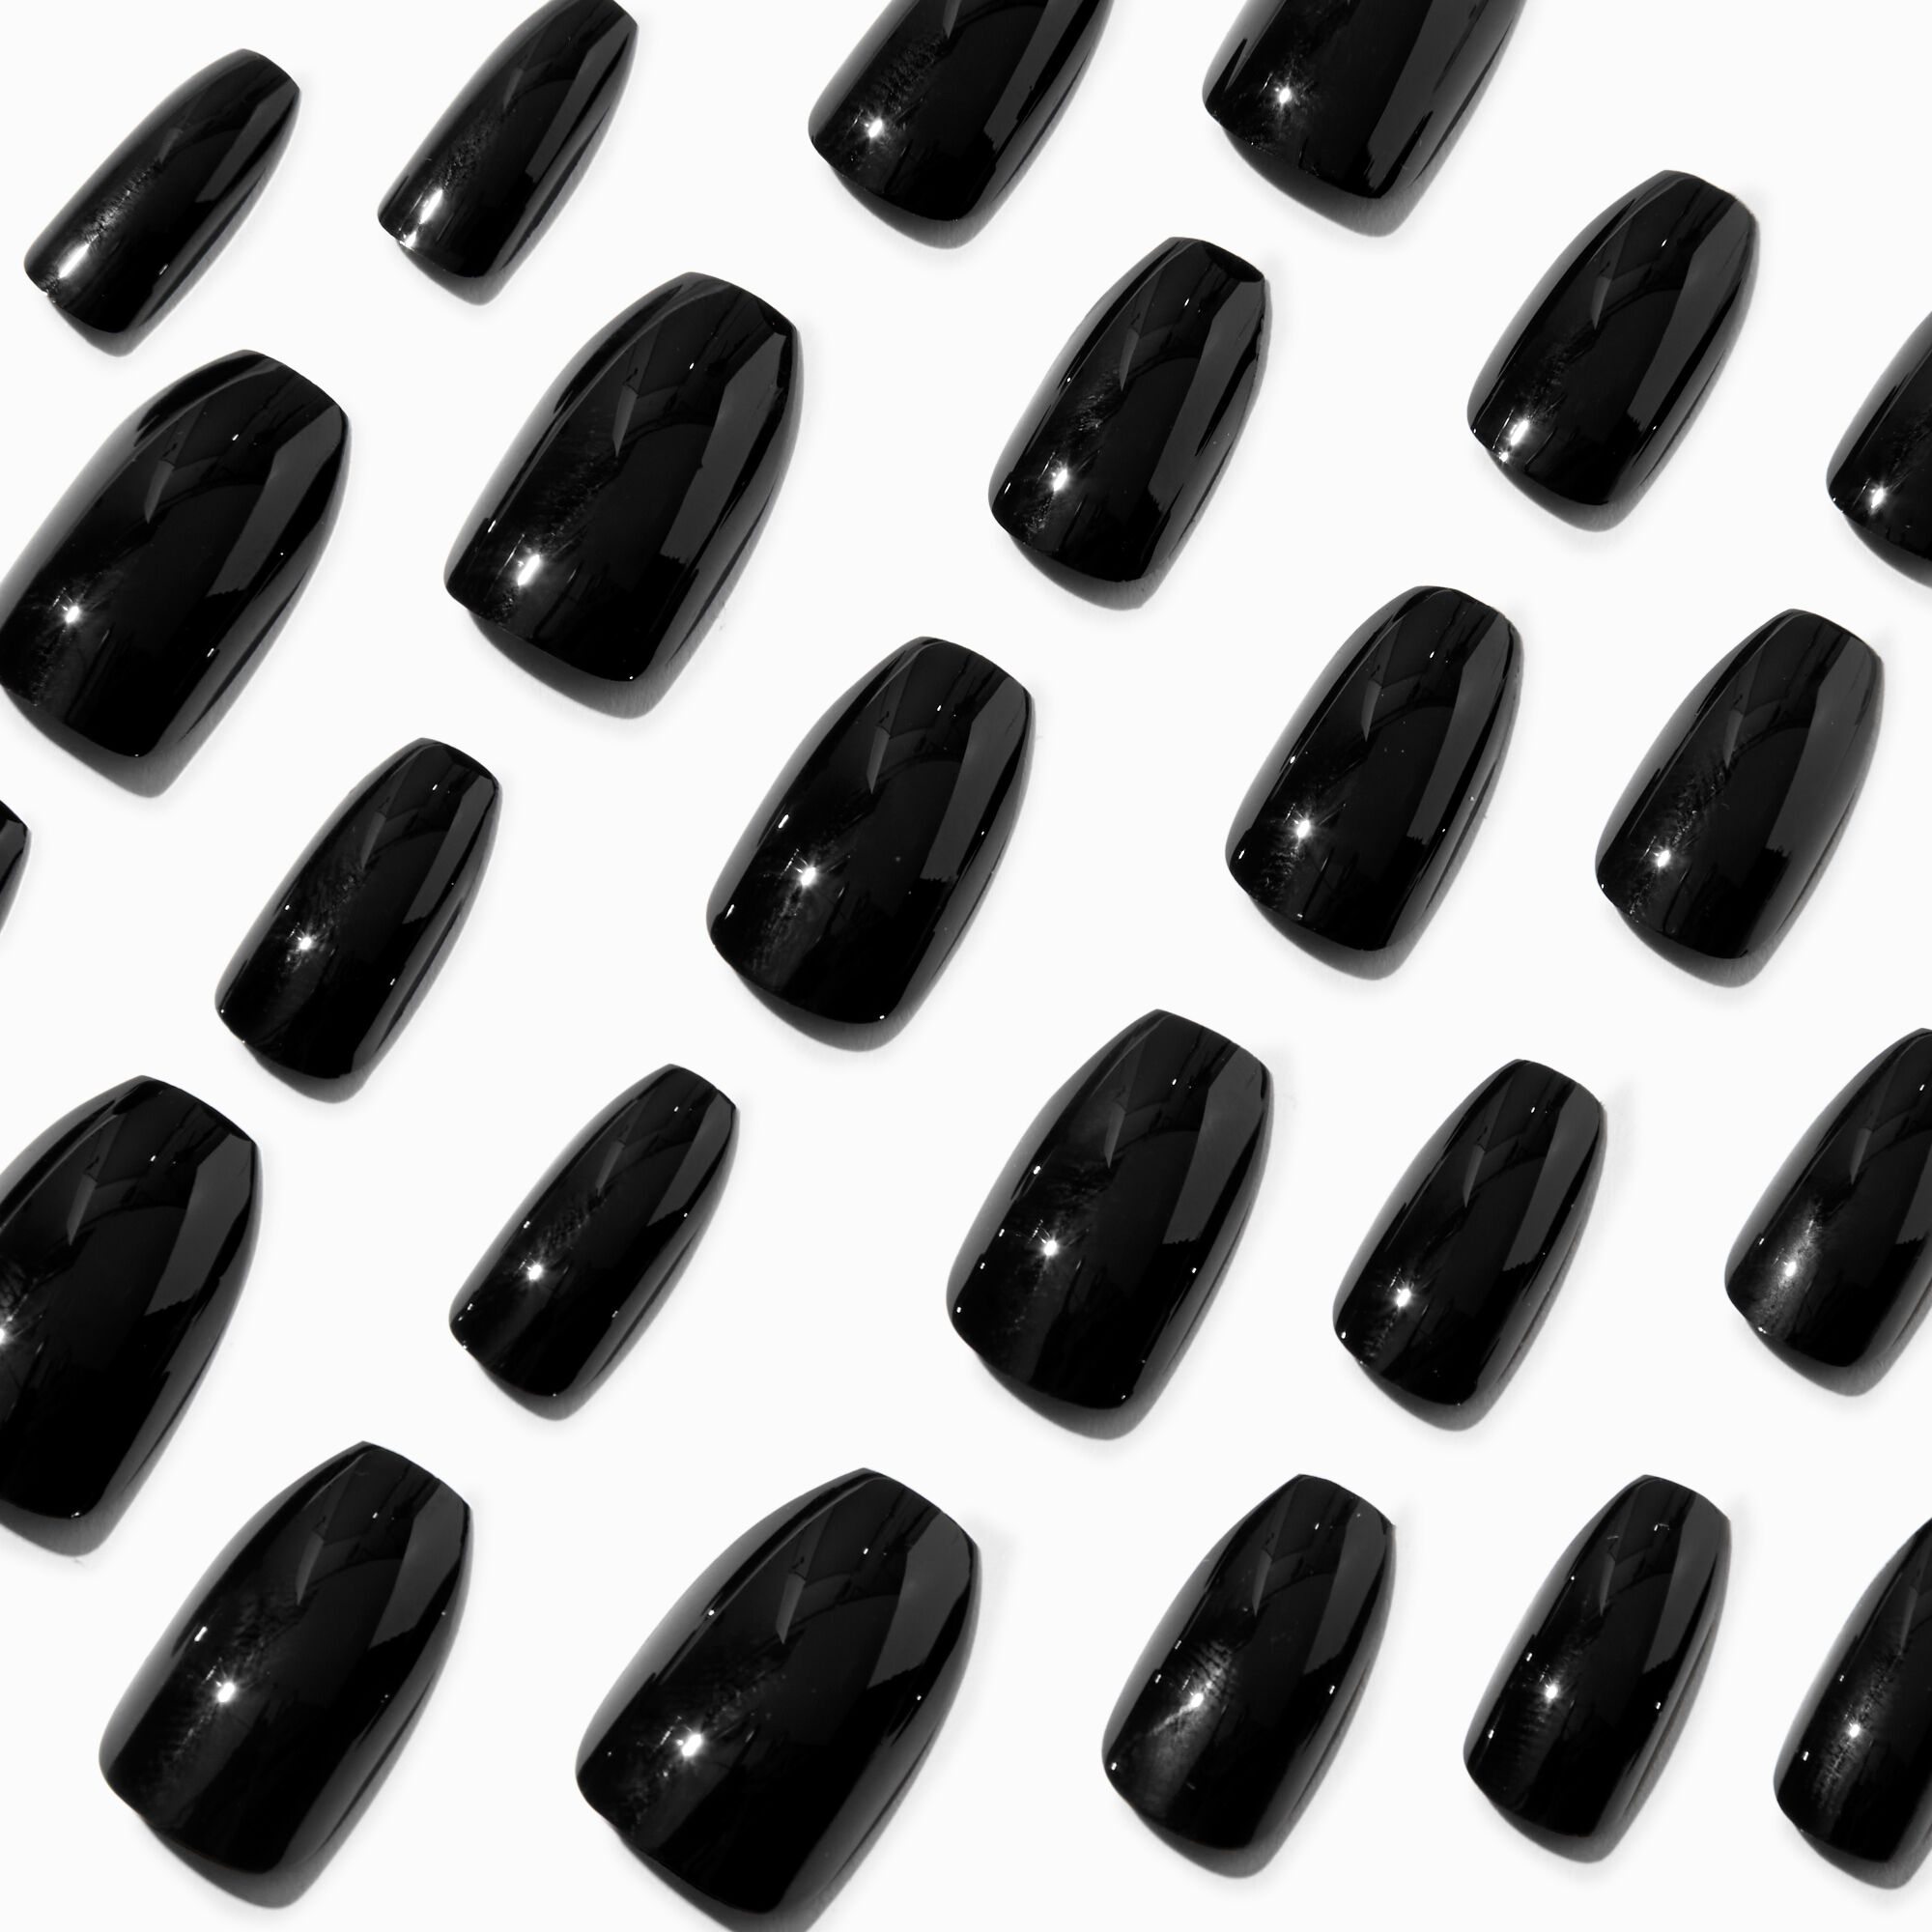 View Claires Glossy Coffin Faux Nail Set 24 Pack Black information